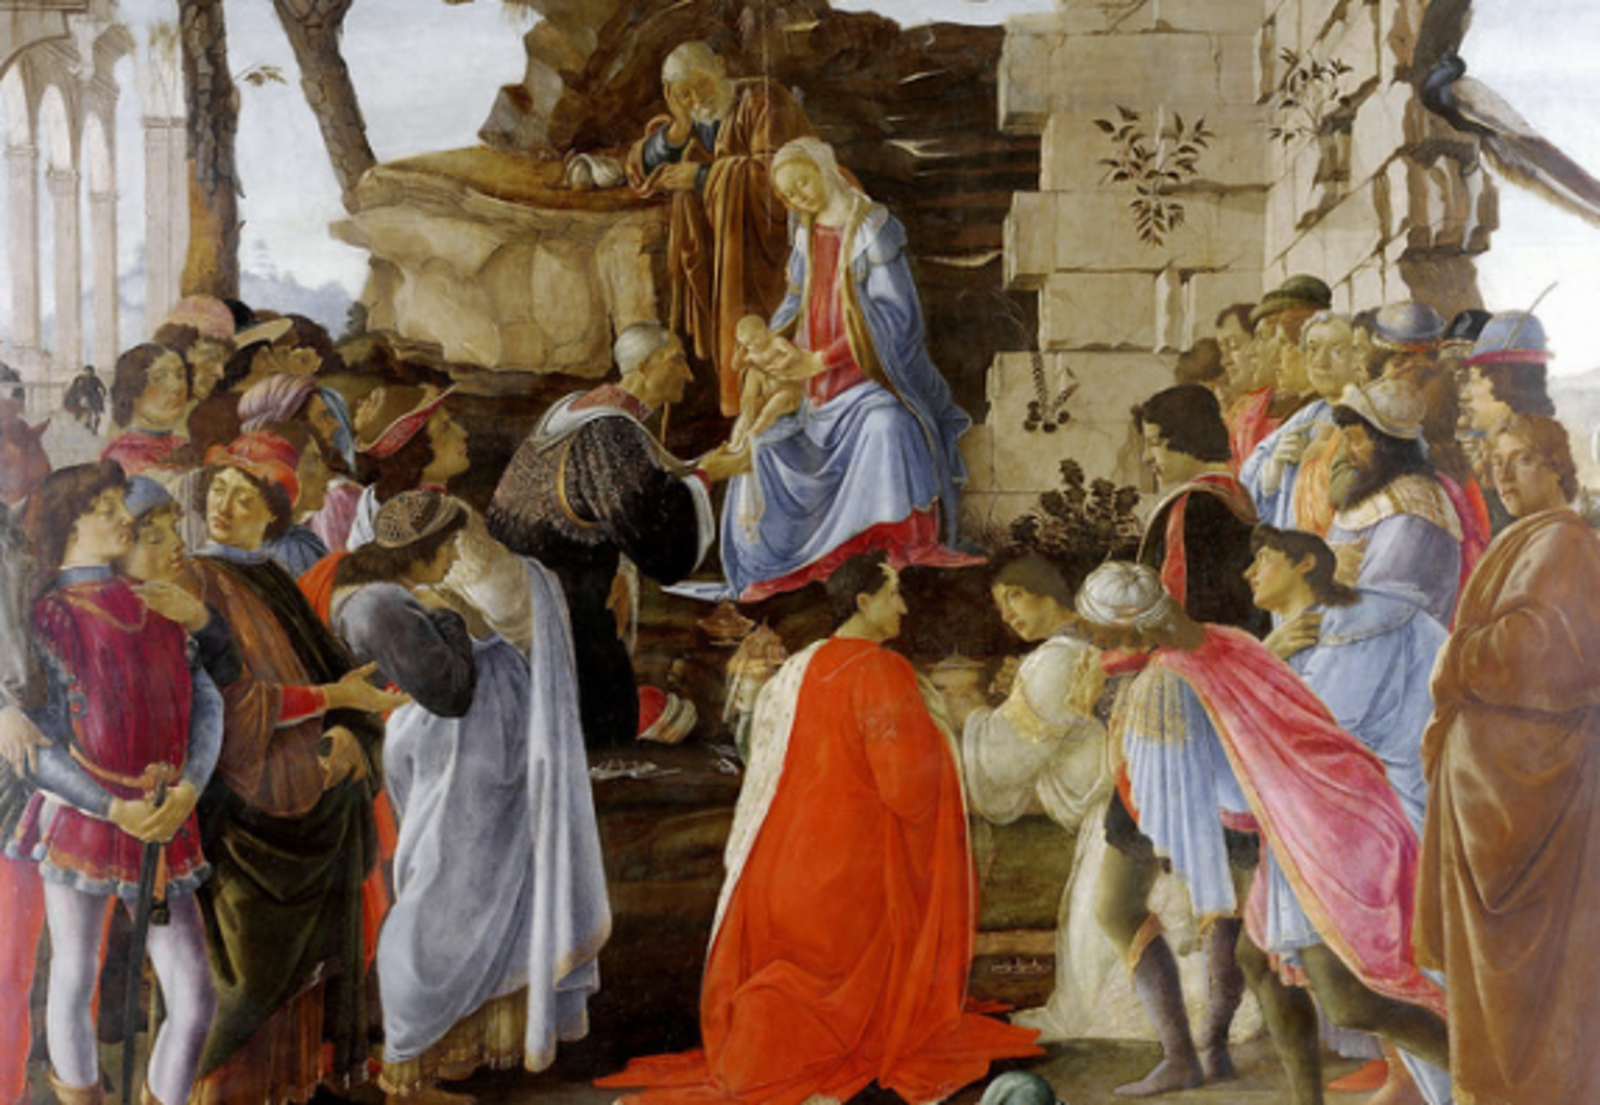 Adoration of the Magi - Painting by Sandro Botticelli